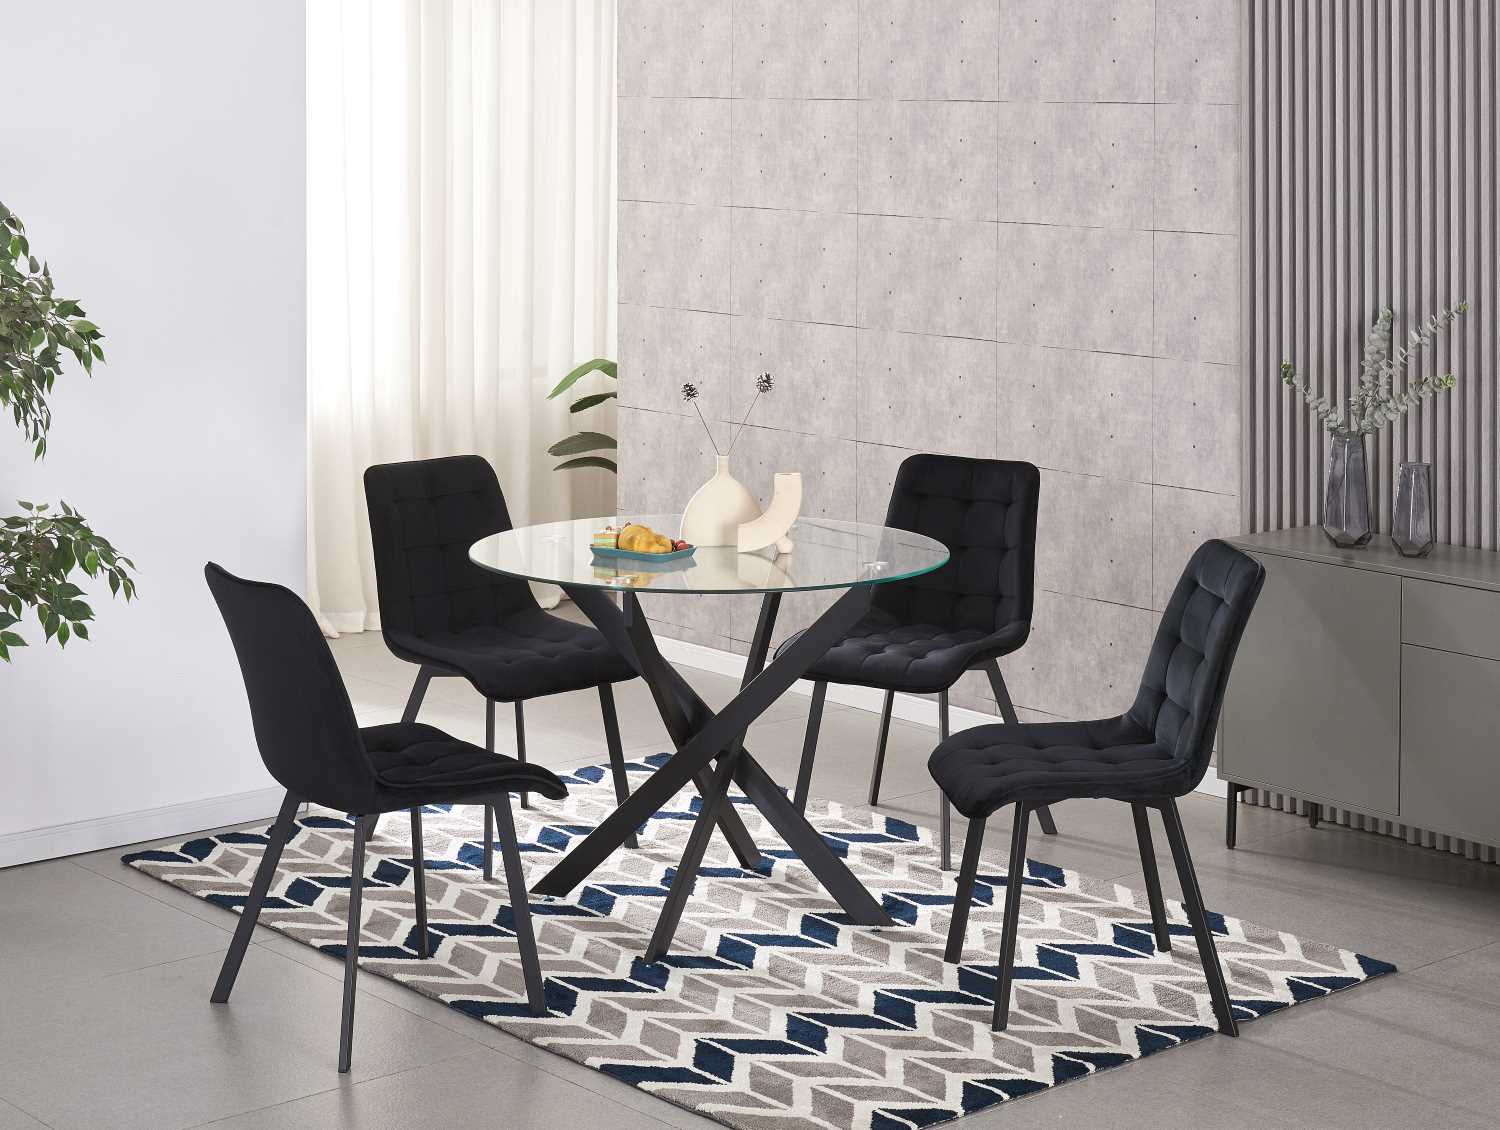 Dining Collection 3461 / 214 Black